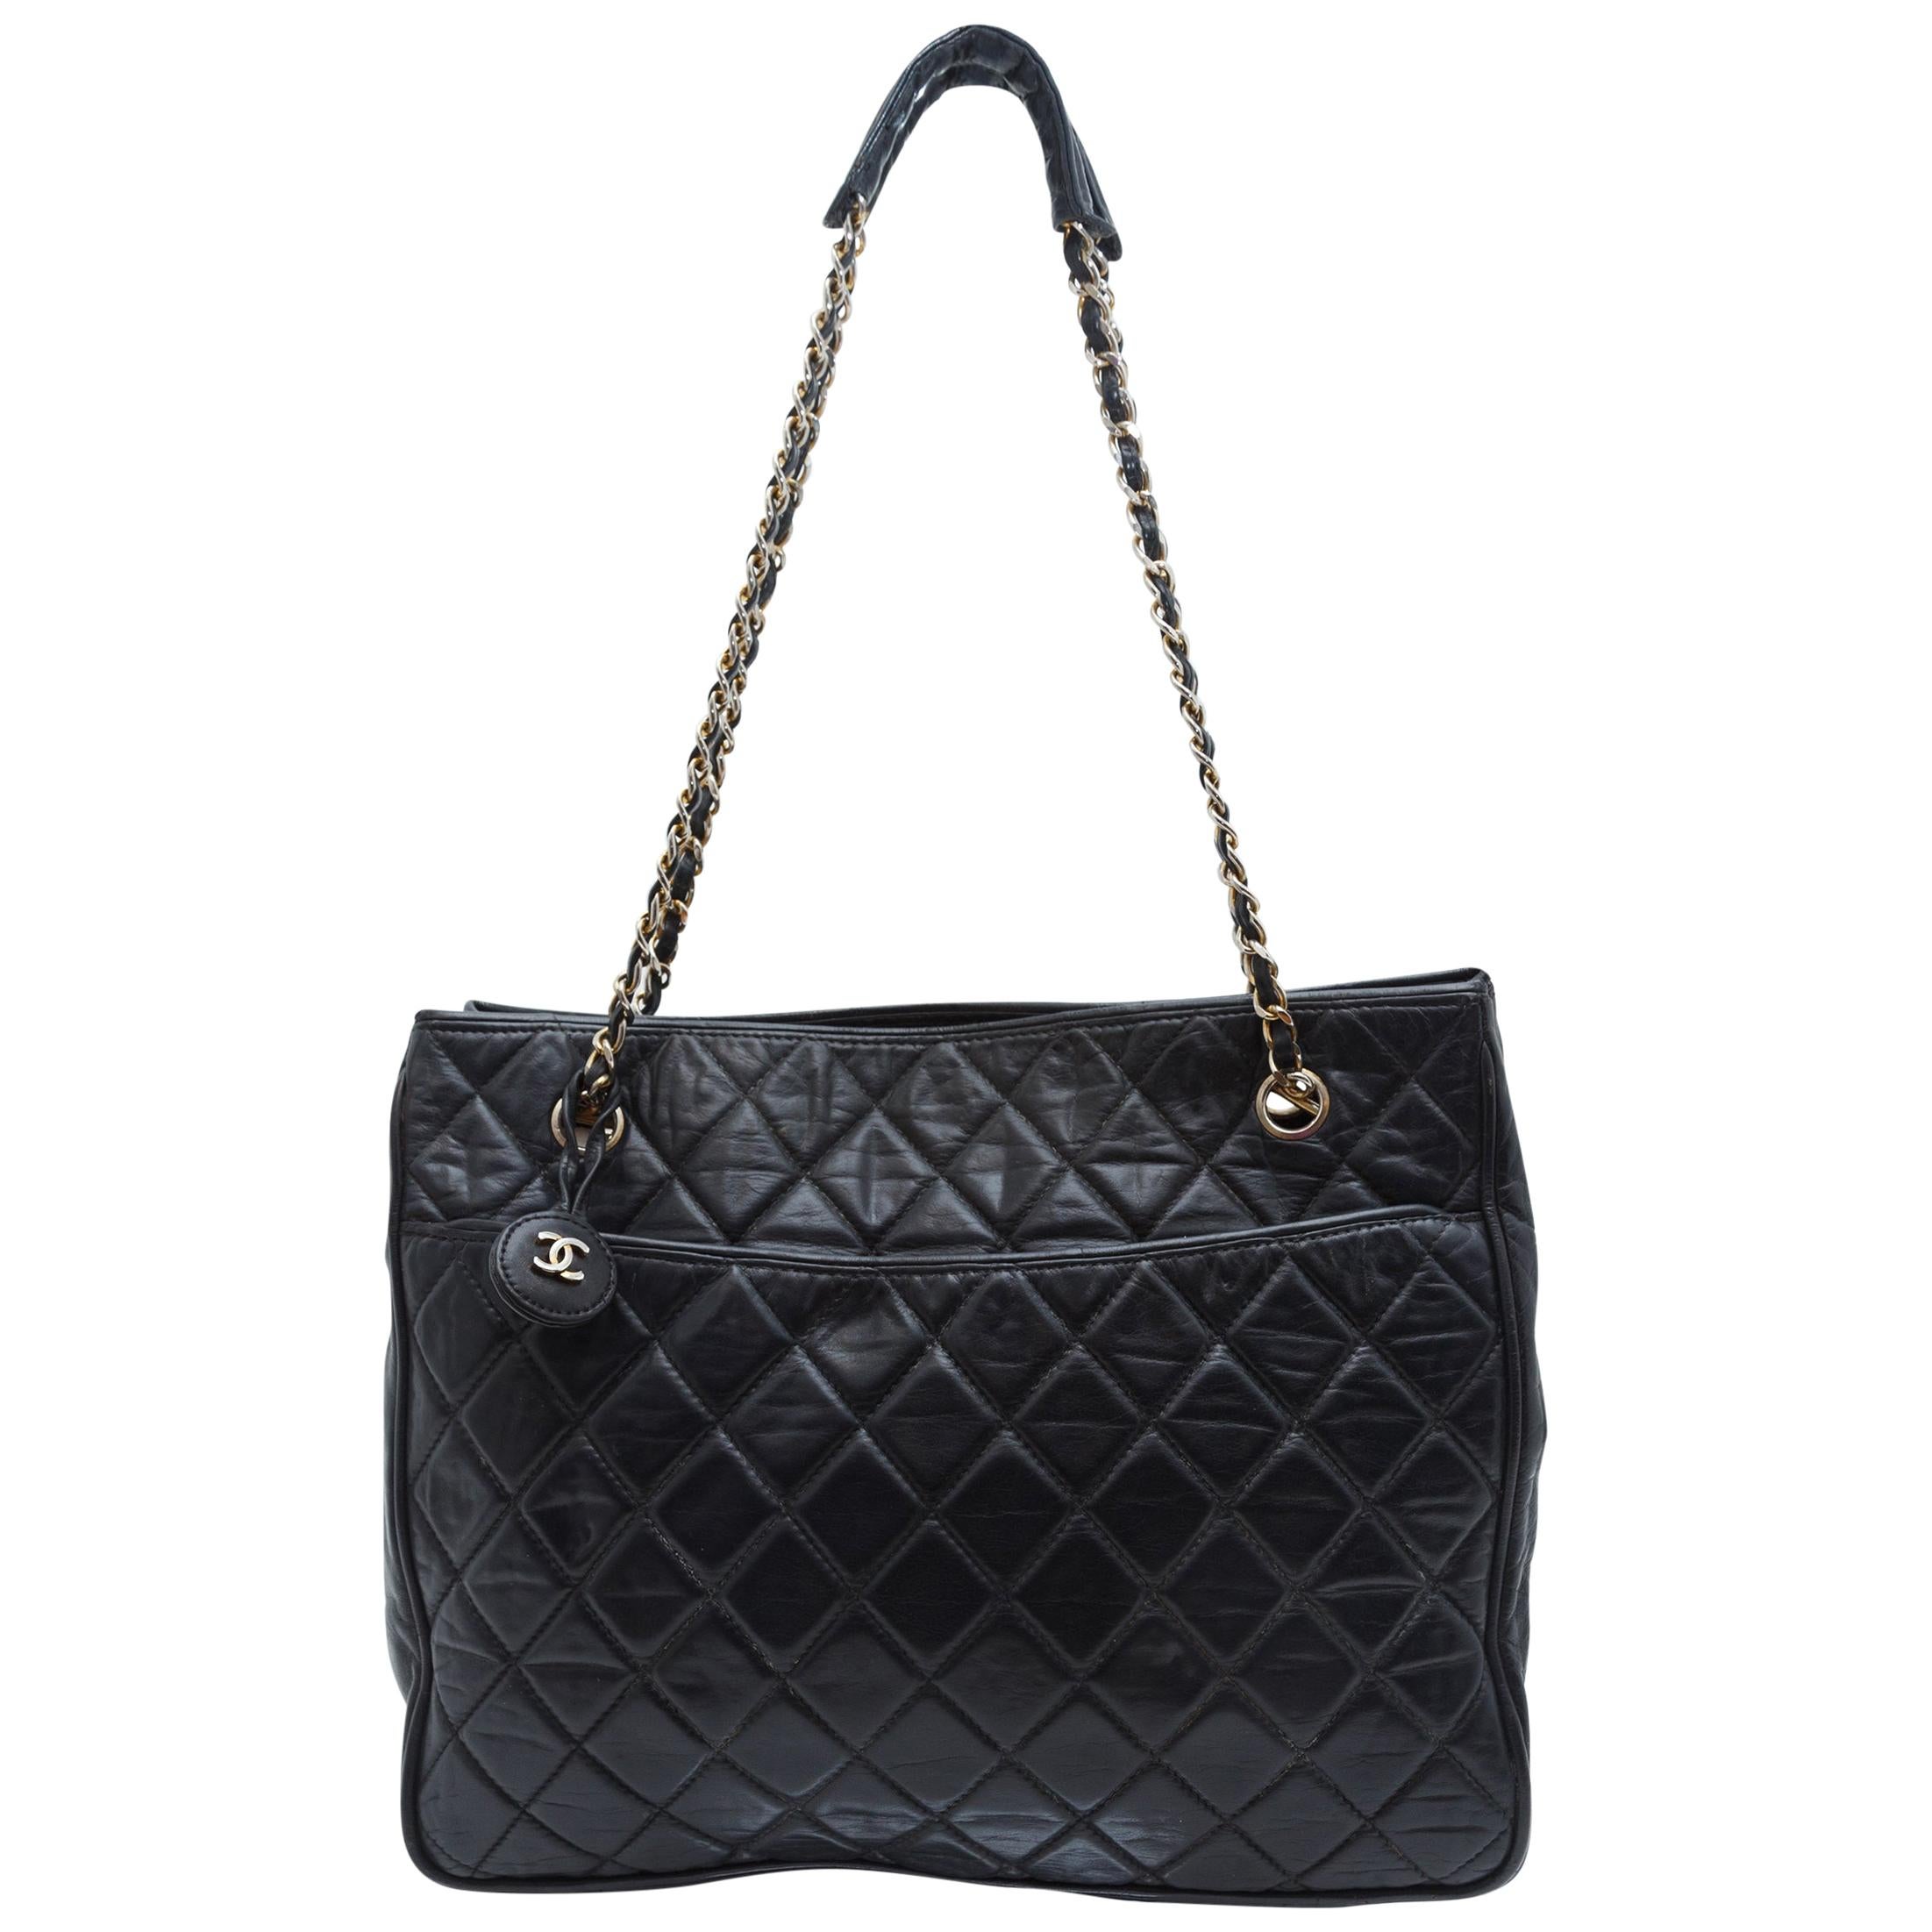 Chanel Black Classic Quilted Tote Bag